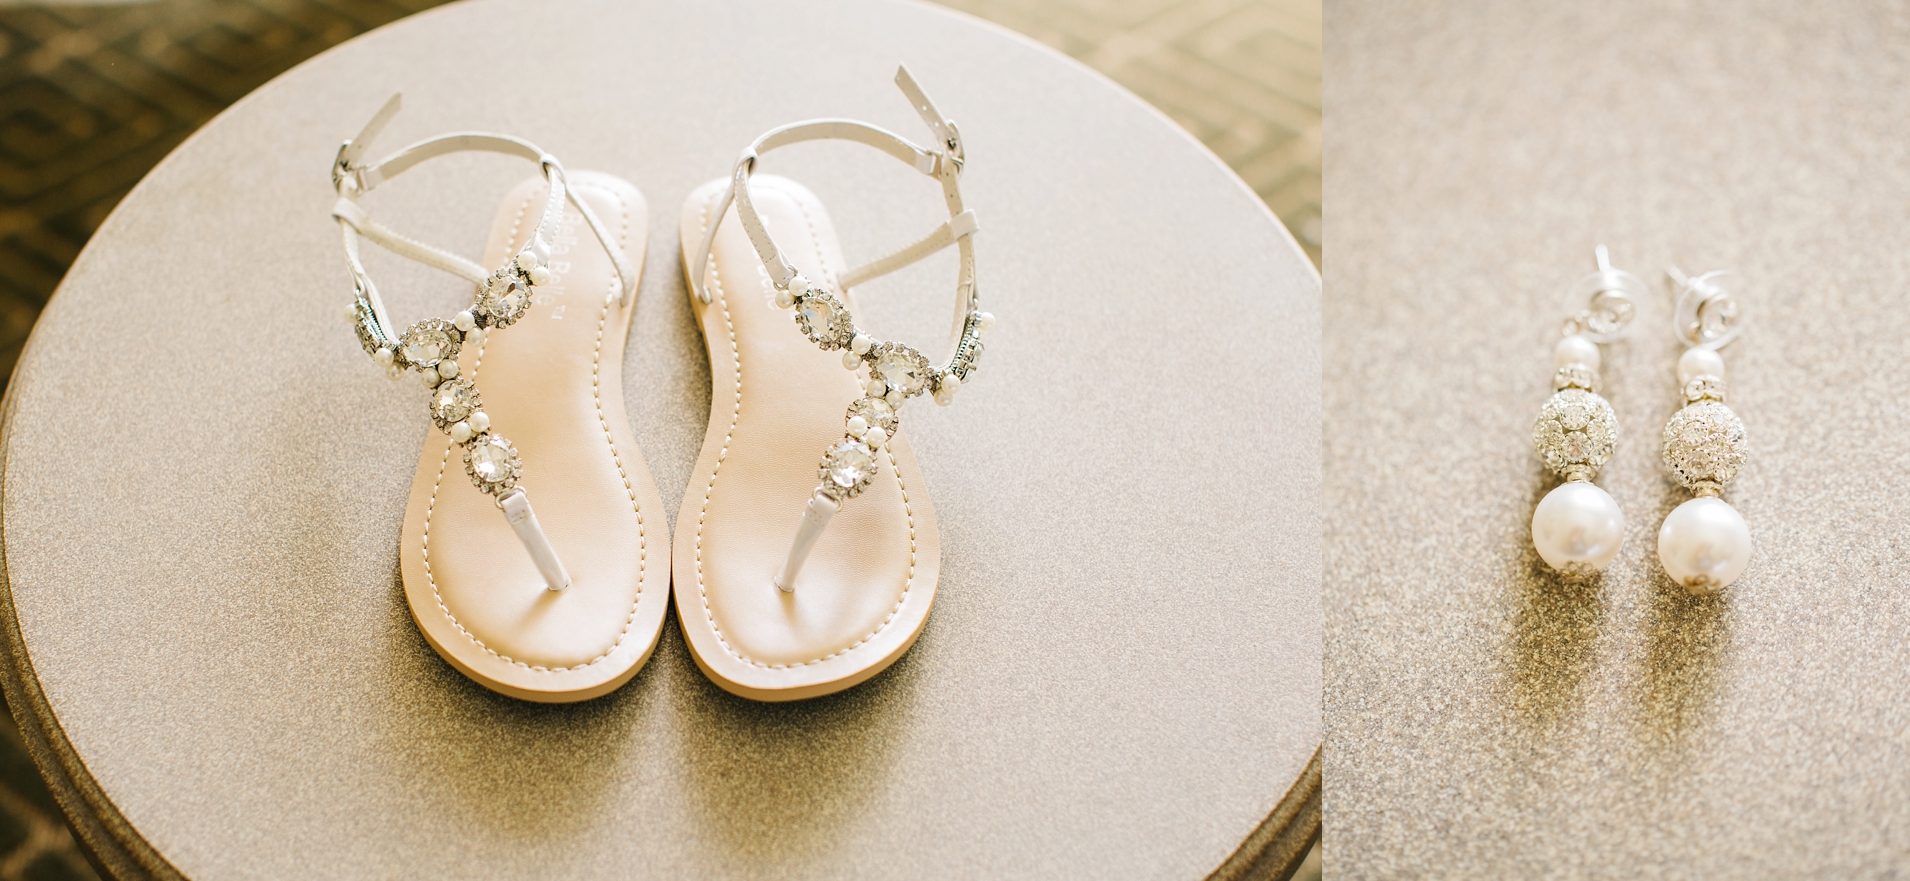 Bridal Shoes and Jewelry in Orange County, CA - Brittney Hannon Photography